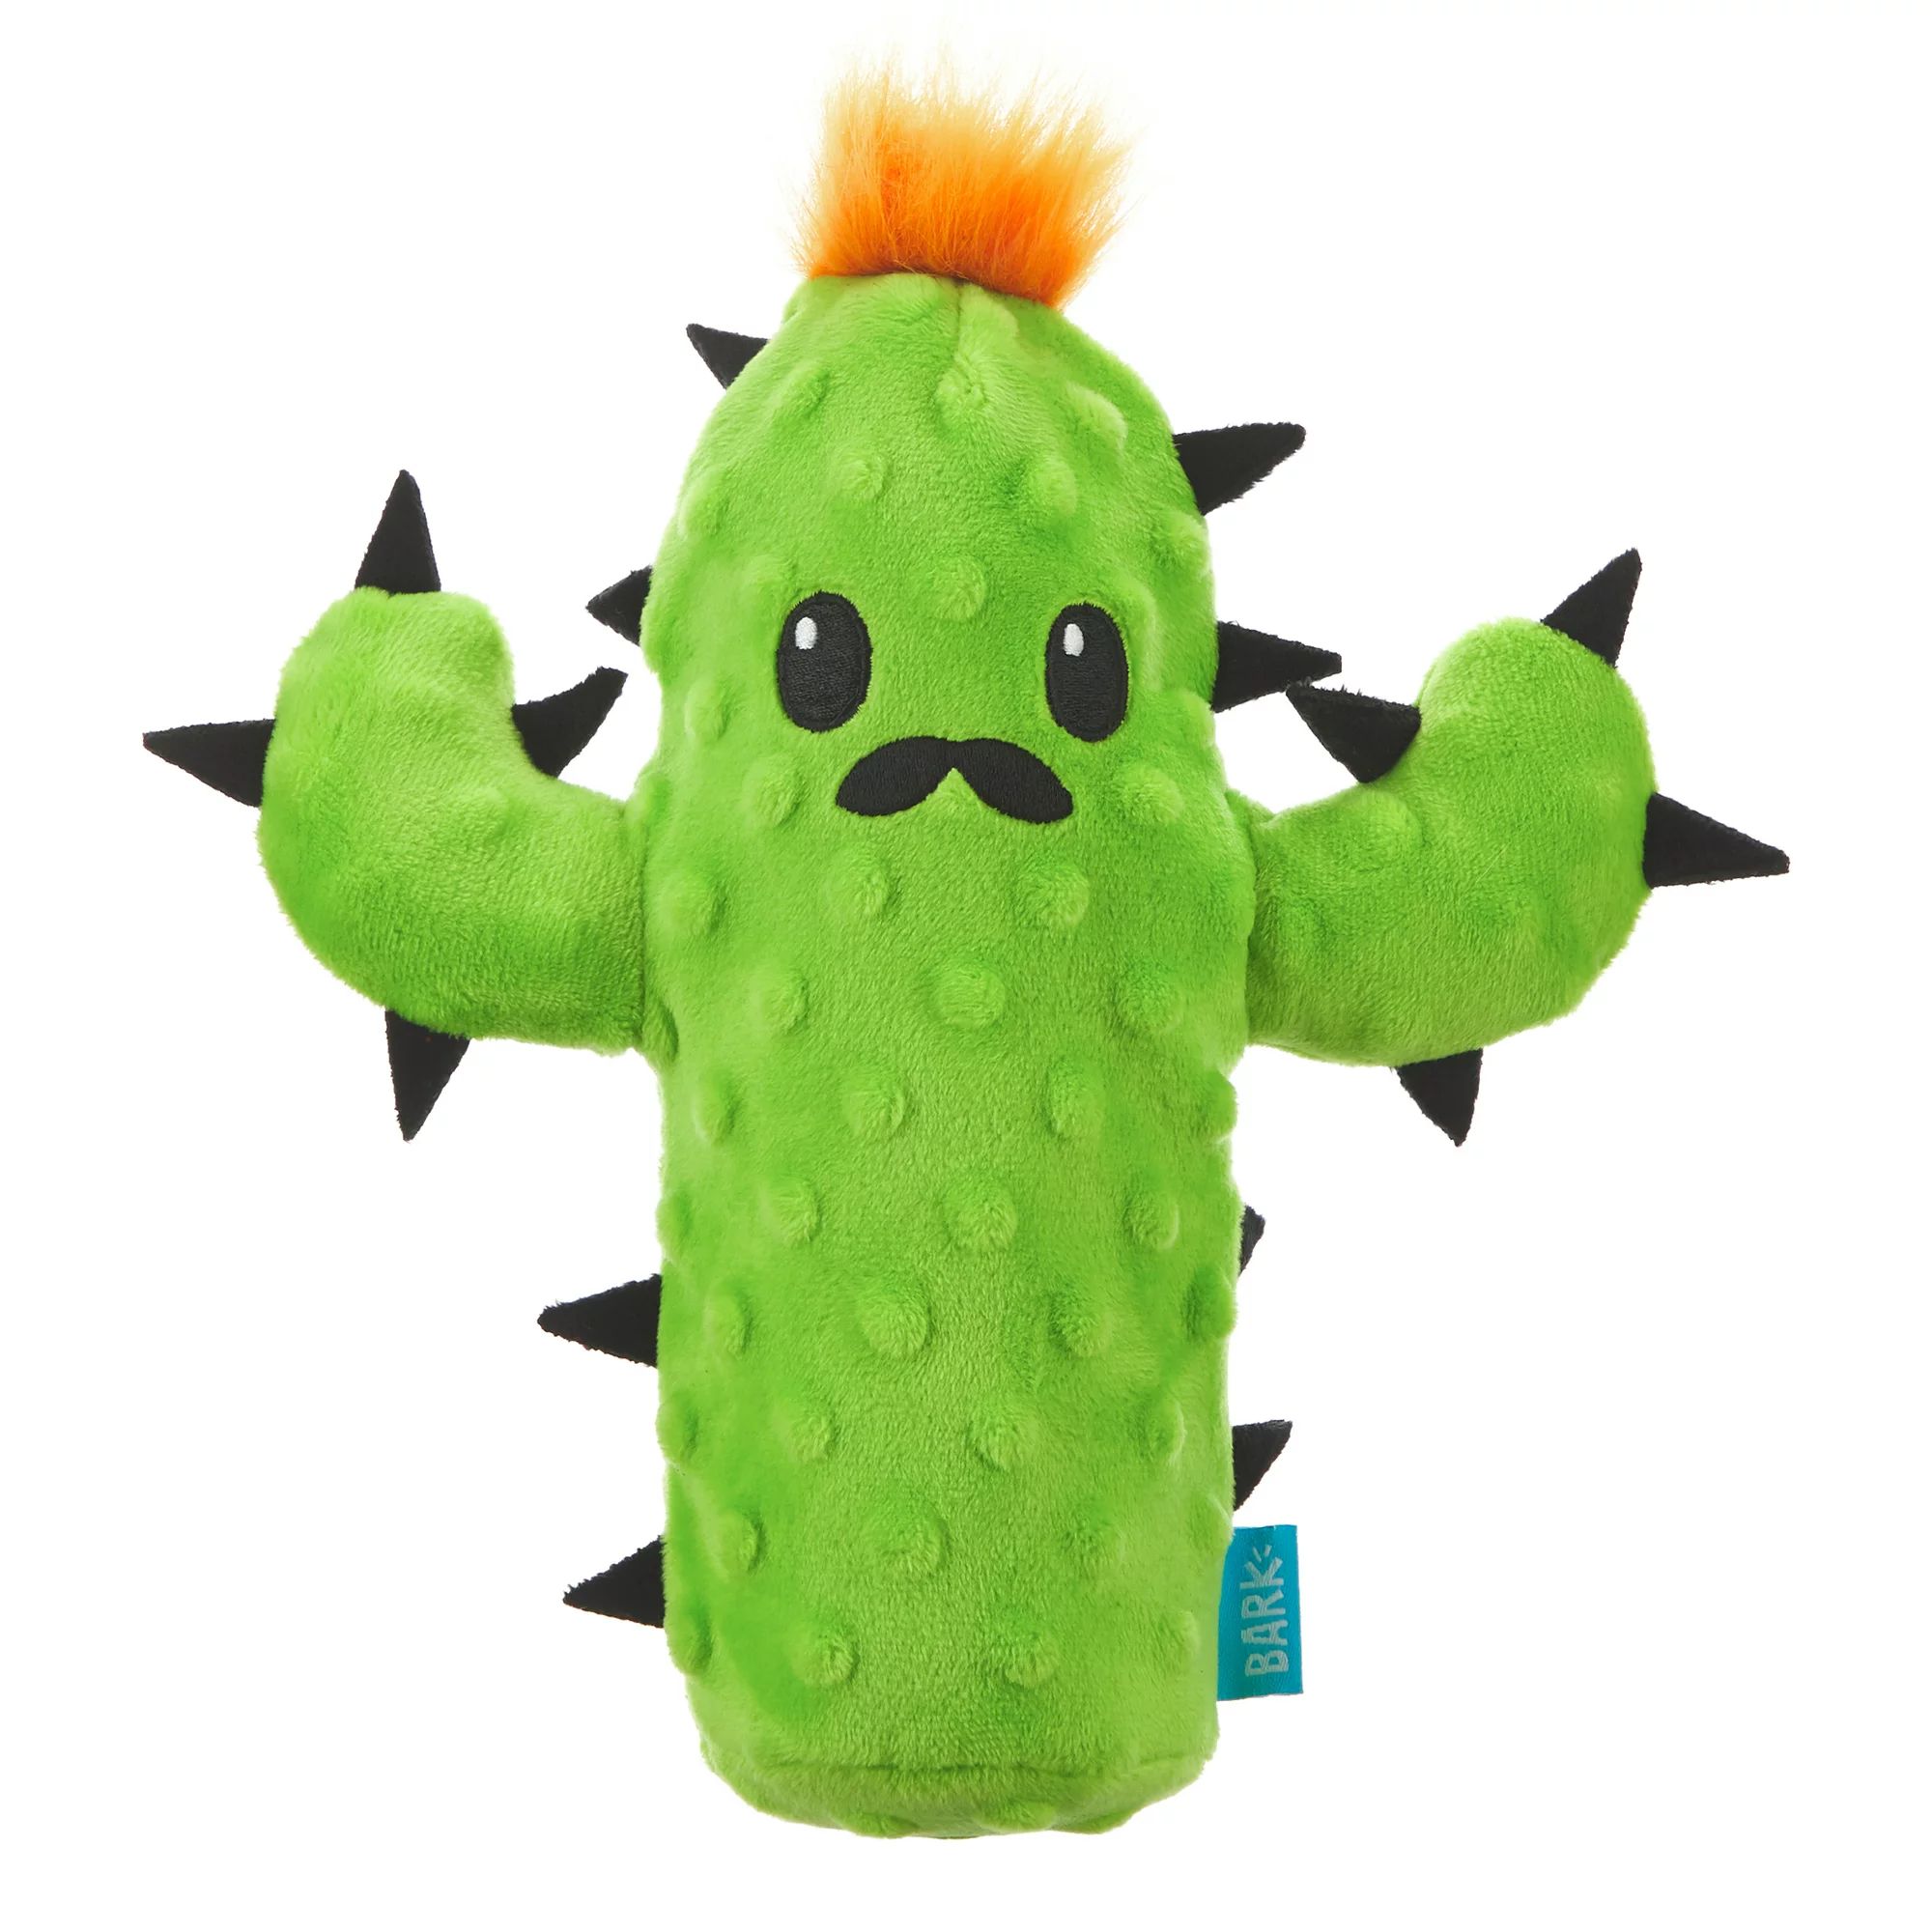 BARK Prickly Pete Dog Toy - Features Surprise Squeaker Toy, Xs to Small Dogs | Walmart (US)